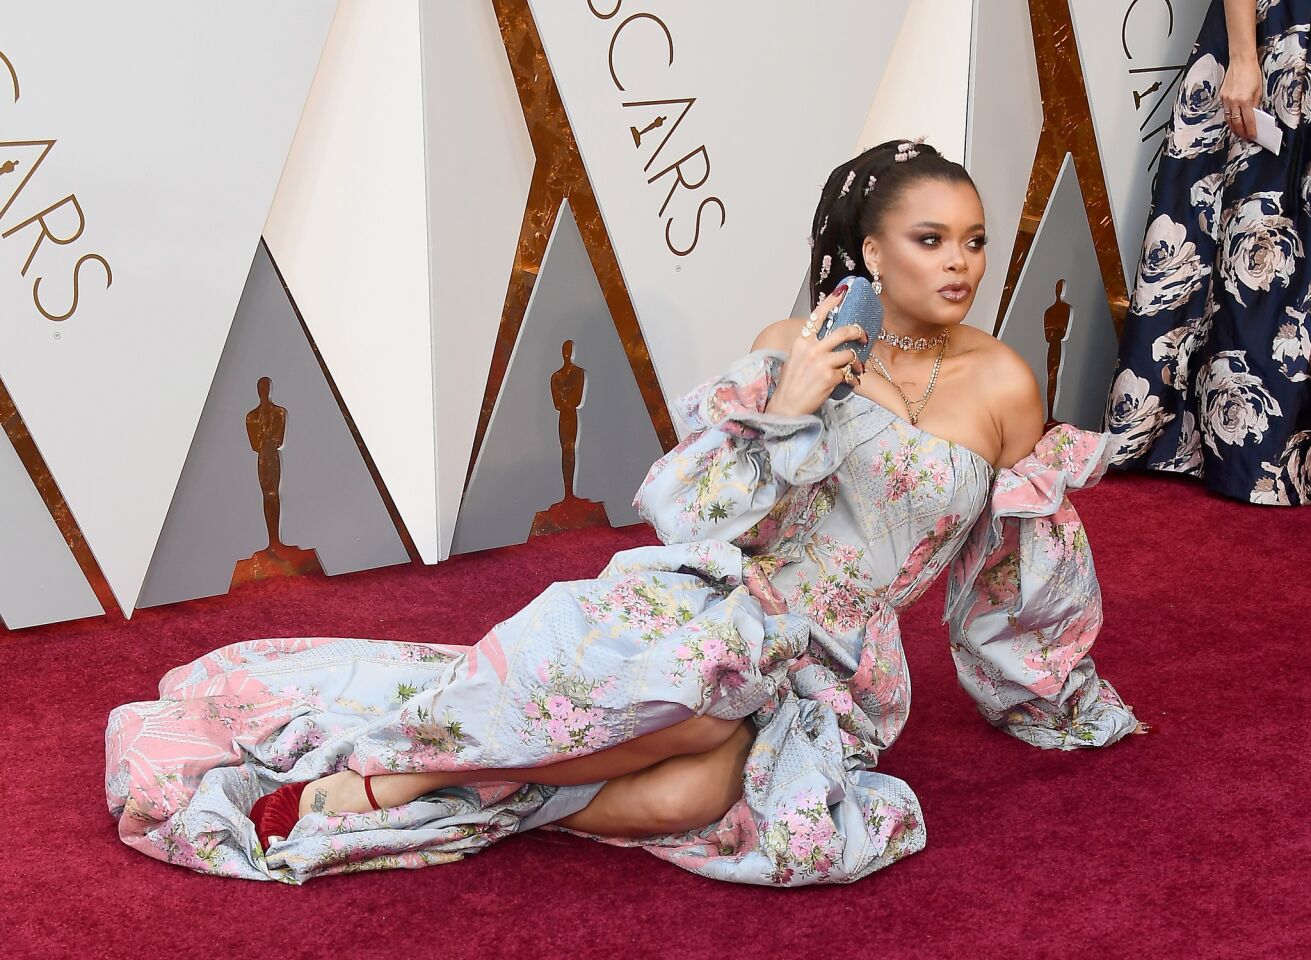 HOLLYWOOD, CA - MARCH 04: Andra Day attends the 90th Annual Academy Awards at Hollywood & Highland Center on March 4, 2018 in Hollywood, California. (Photo by Frazer Harrison/Getty Images) ** OUTS - ELSENT, FPG, CM - OUTS * NM, PH, VA if sourced by CT, LA or MoD **